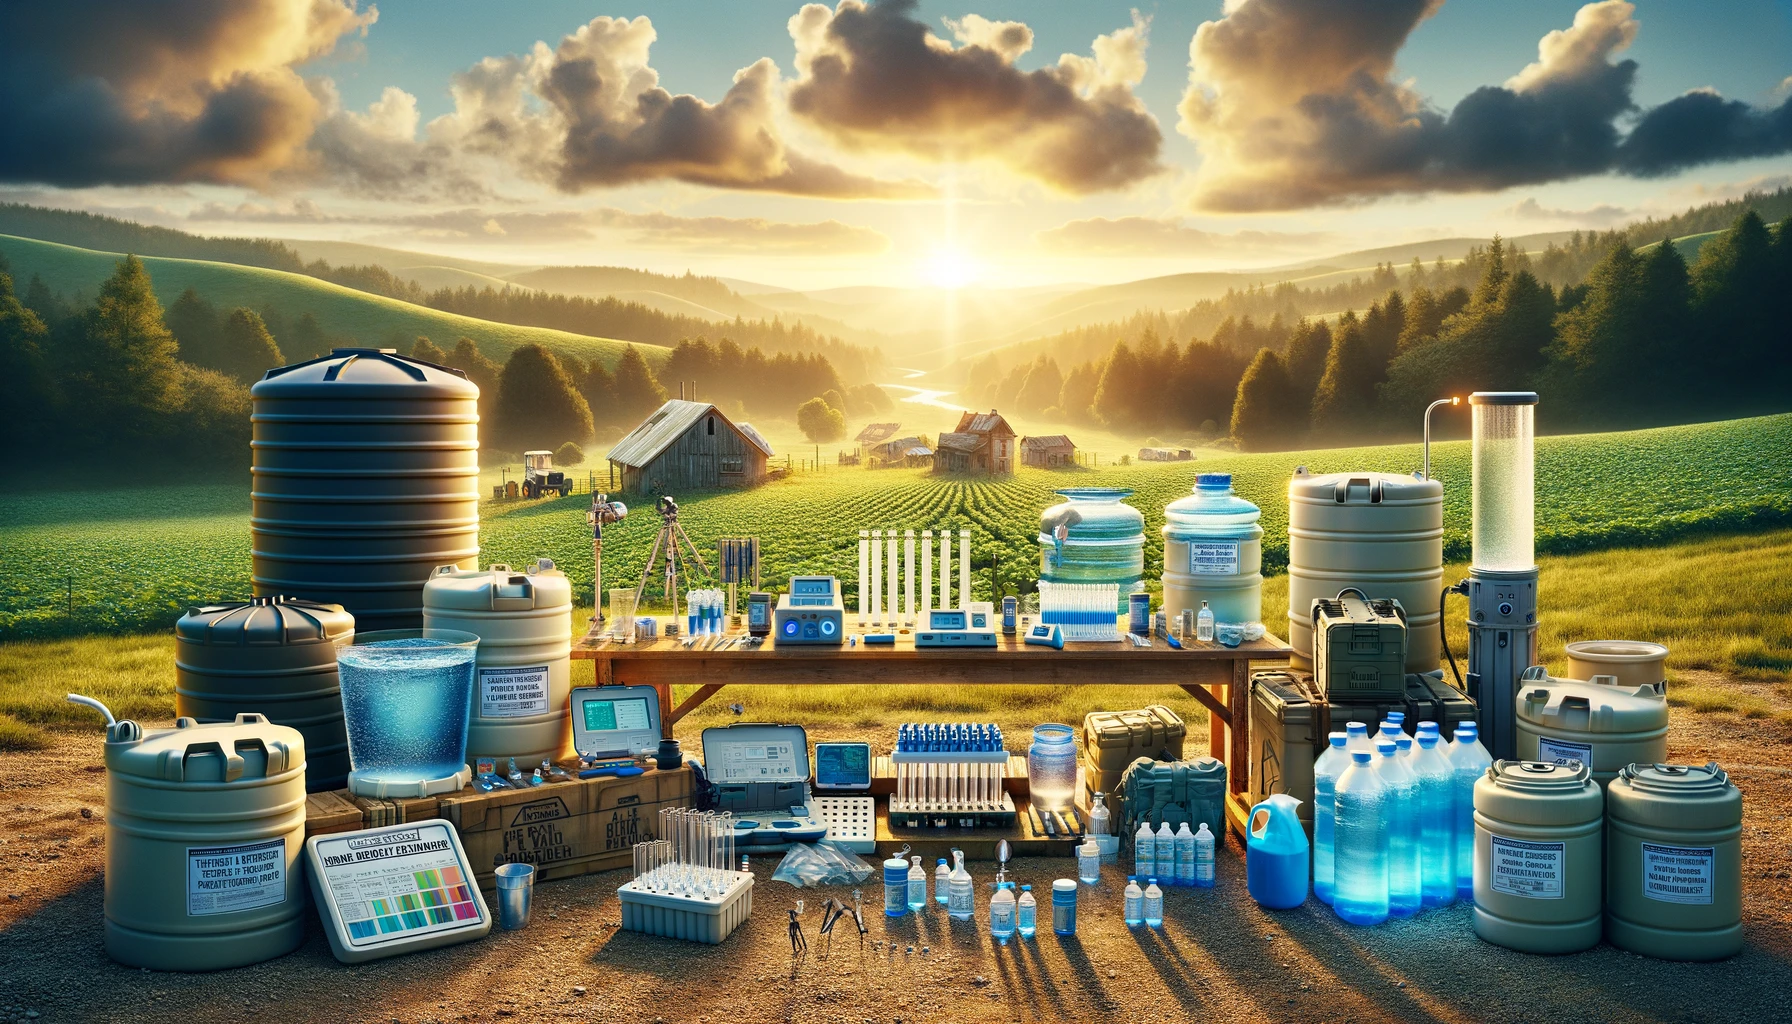 Comprehensive outdoor water testing and treatment setup showcasing water testing kits, UV light systems, and chemical treatment stations near rainwater storage containers, set against an idyllic rural backdrop, illuminated by the golden light of a setting sun, highlighting a proactive approach to ensuring rainwater potability and safety